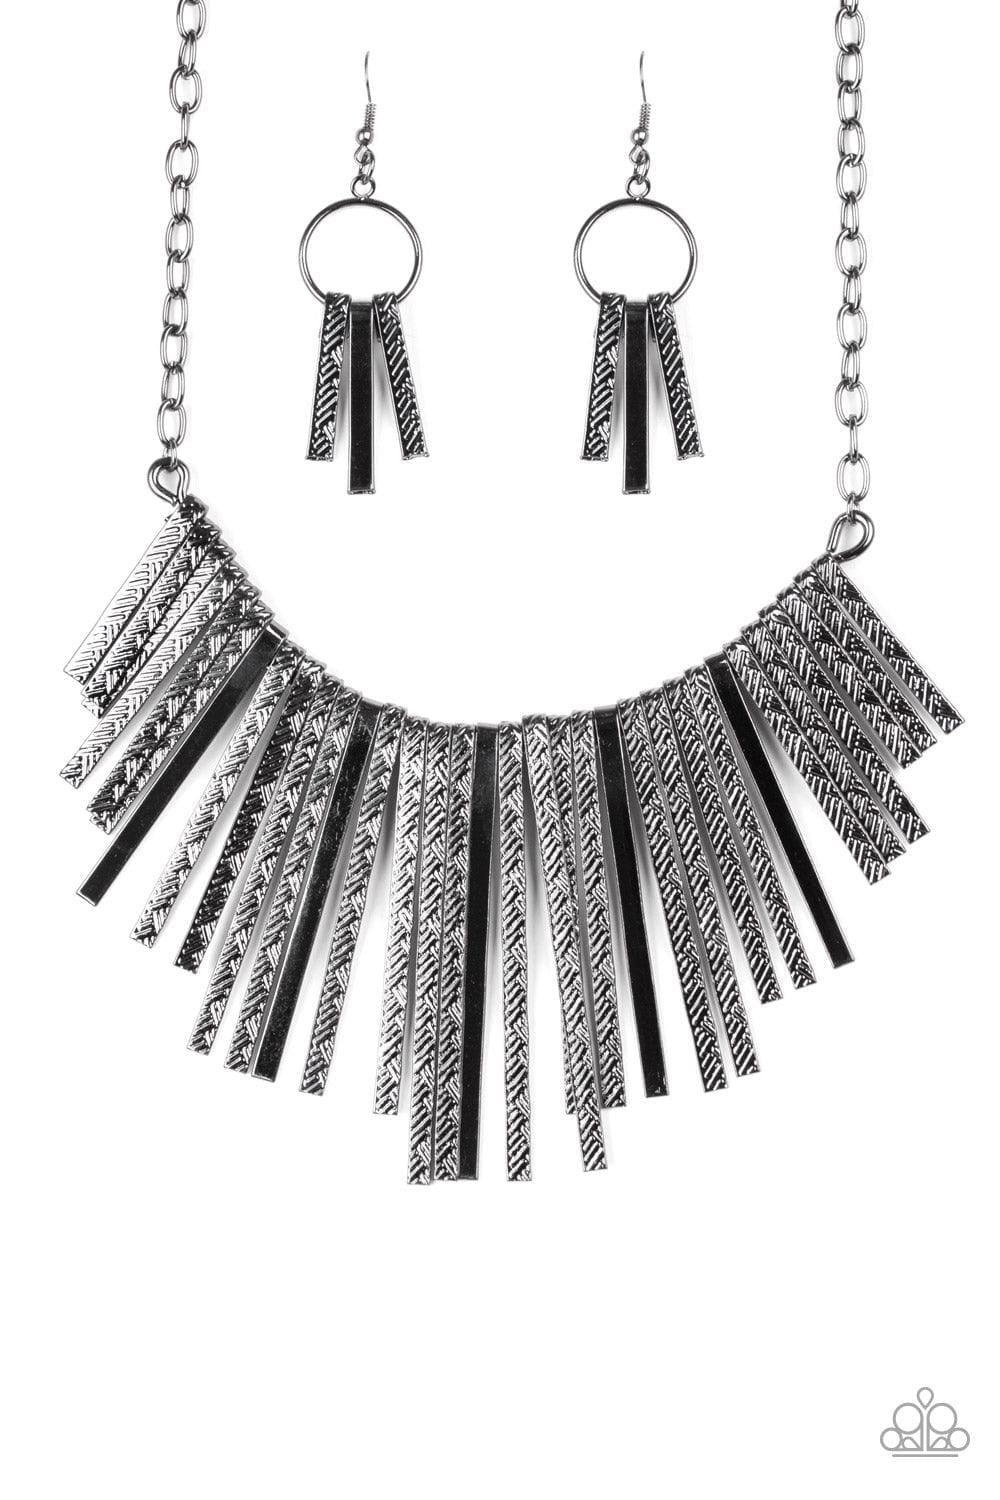 Paparazzi Accessories - Welcome To The Pack - Black Necklace - Bling by JessieK